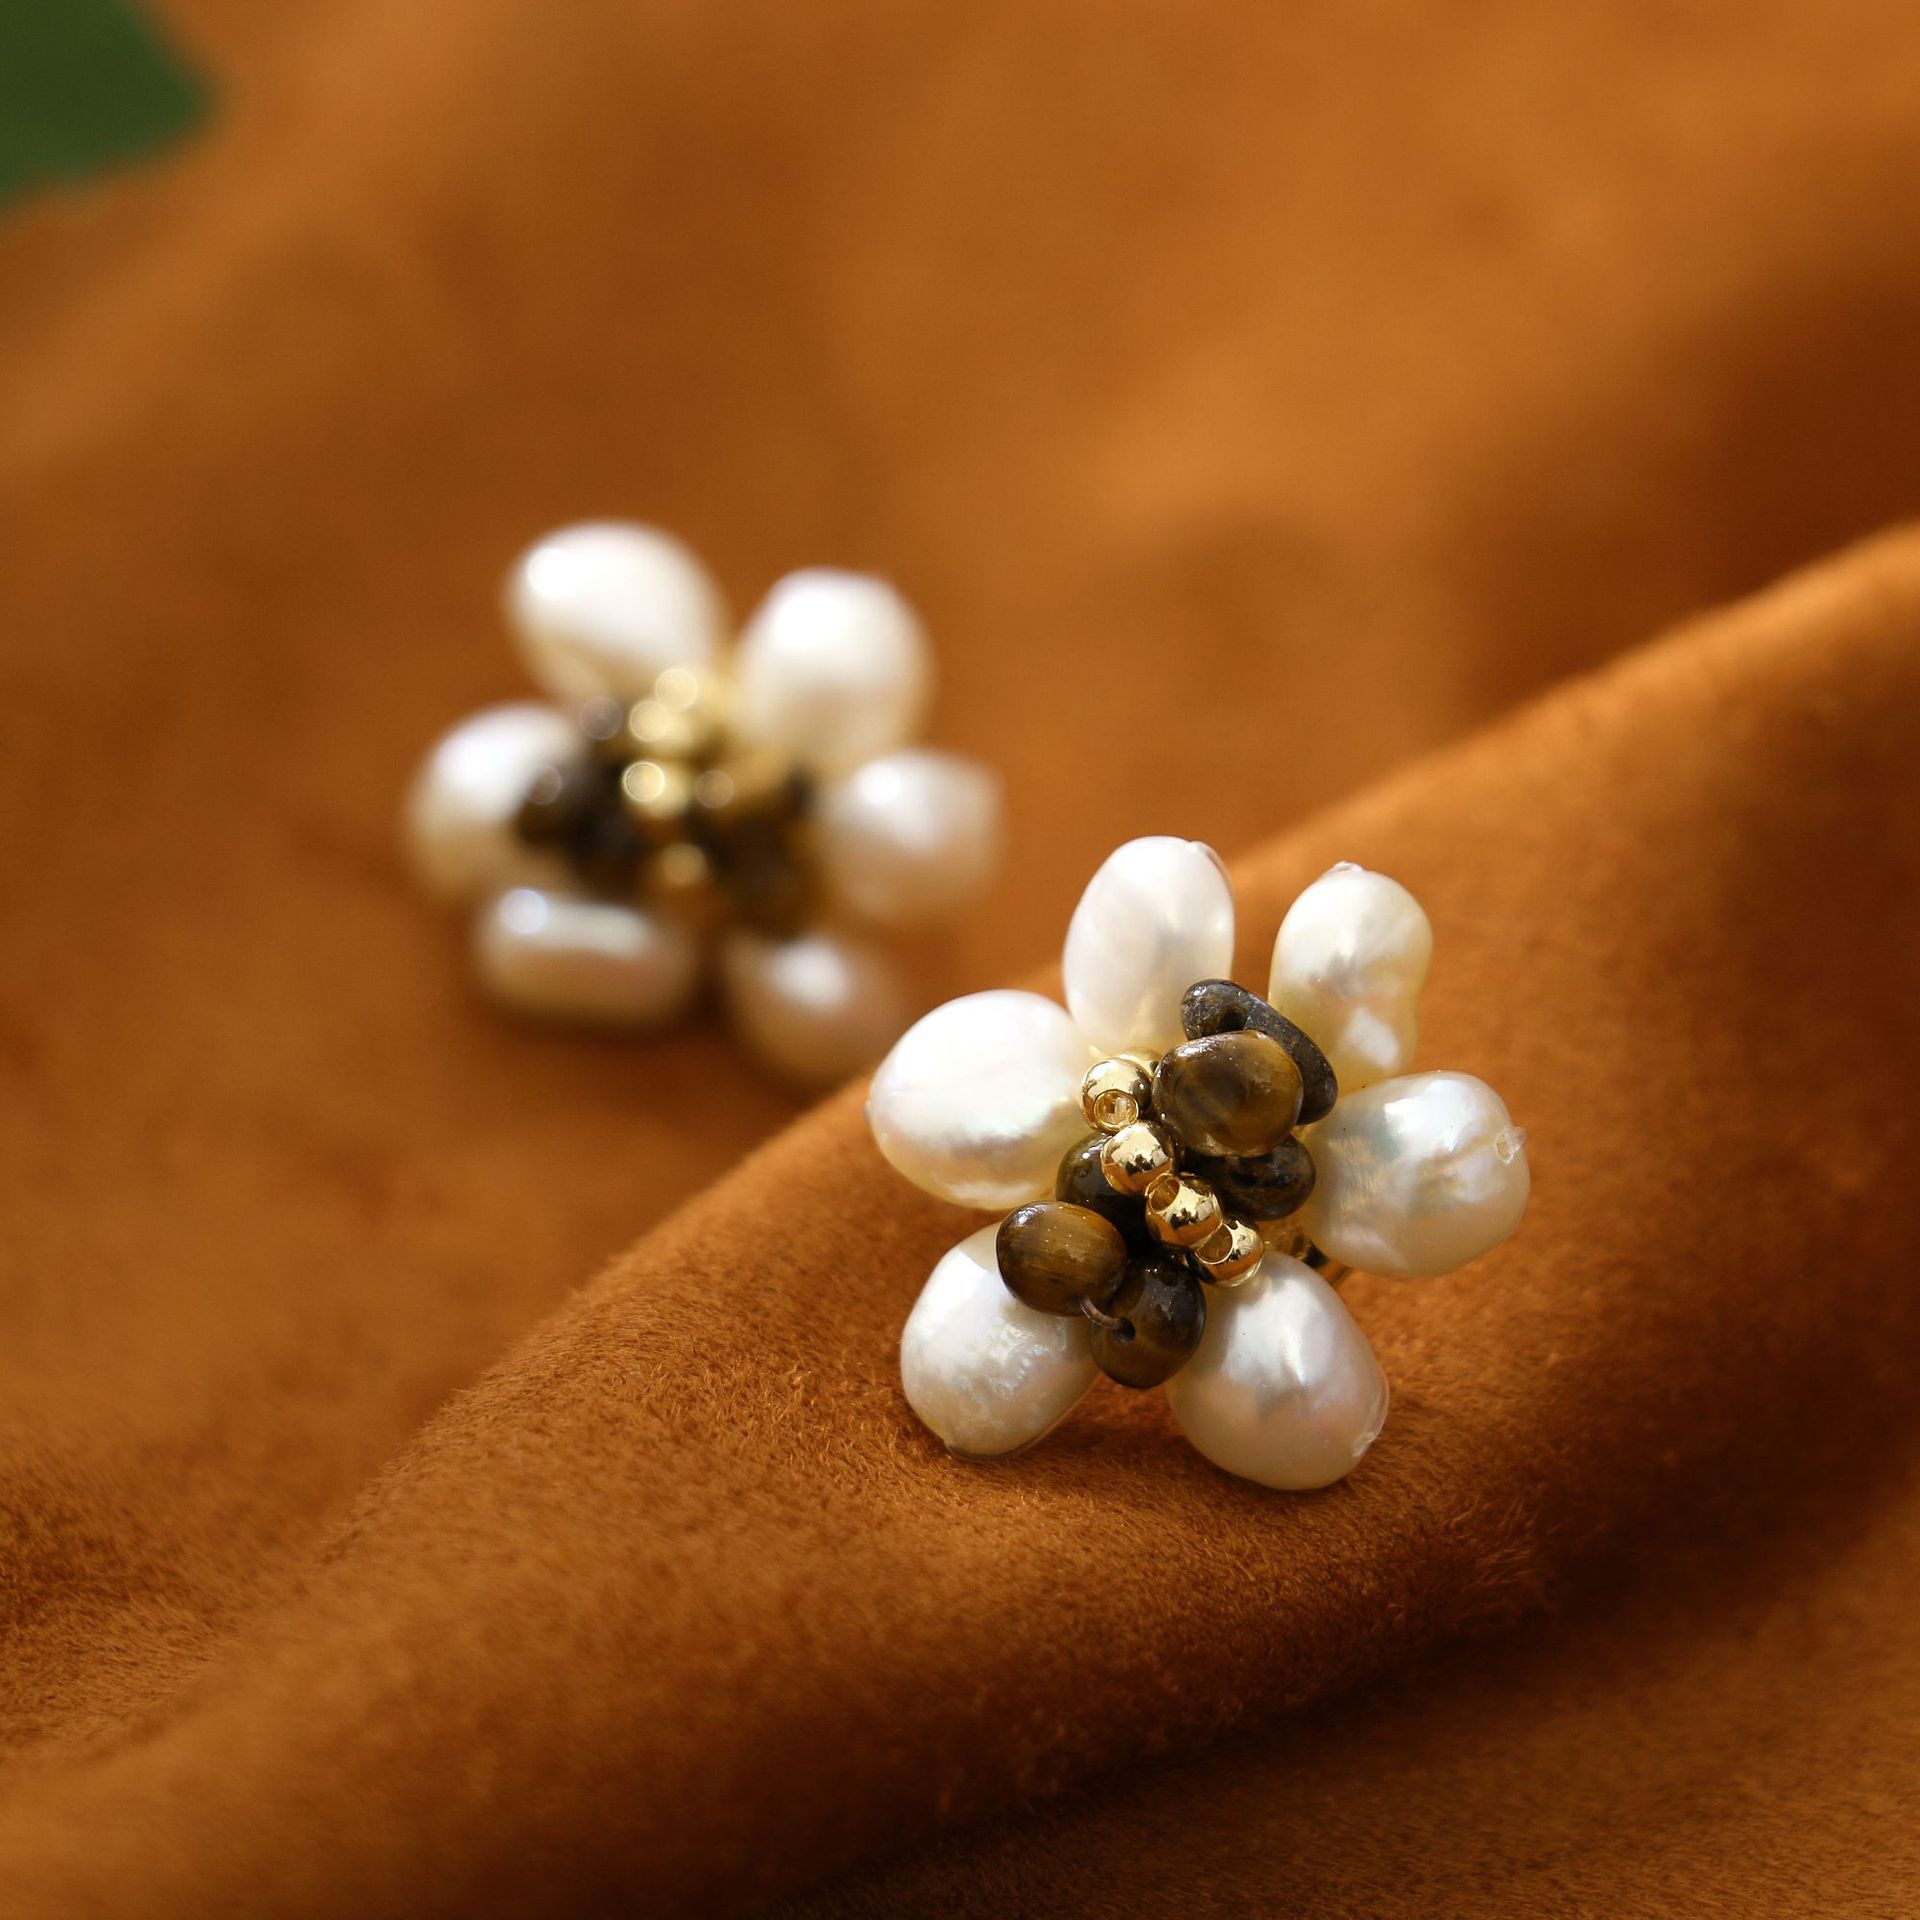 Hand-Woven Tigereye Stud Earrings Fresh Water Pearl Earrings Retro High Sense Temperament Entry Lux Autumn and Winter Special-Interest Earrings